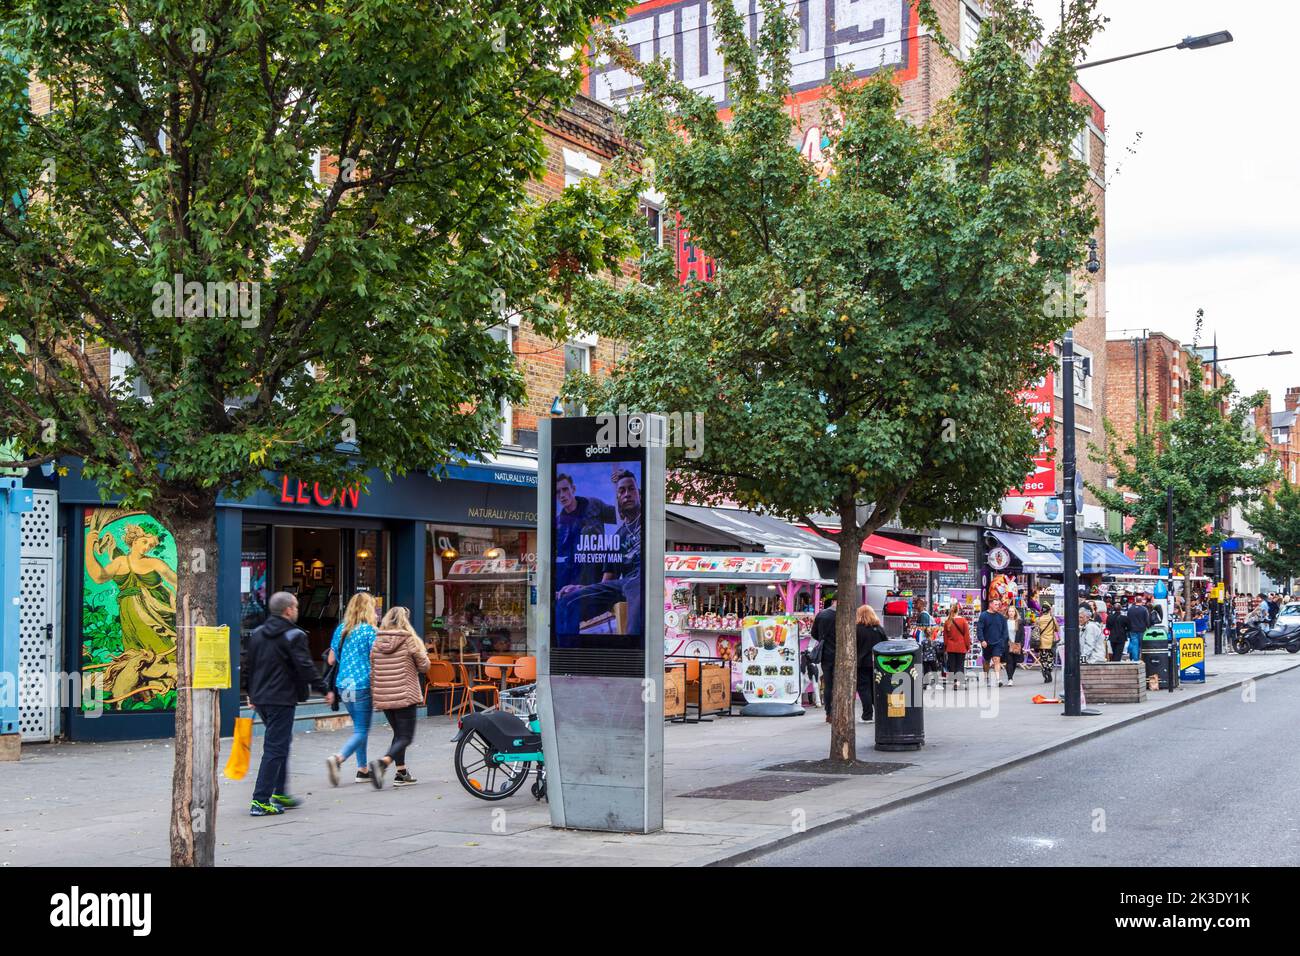 Shops and stalls in Camden High Street, London, UK Stock Photo